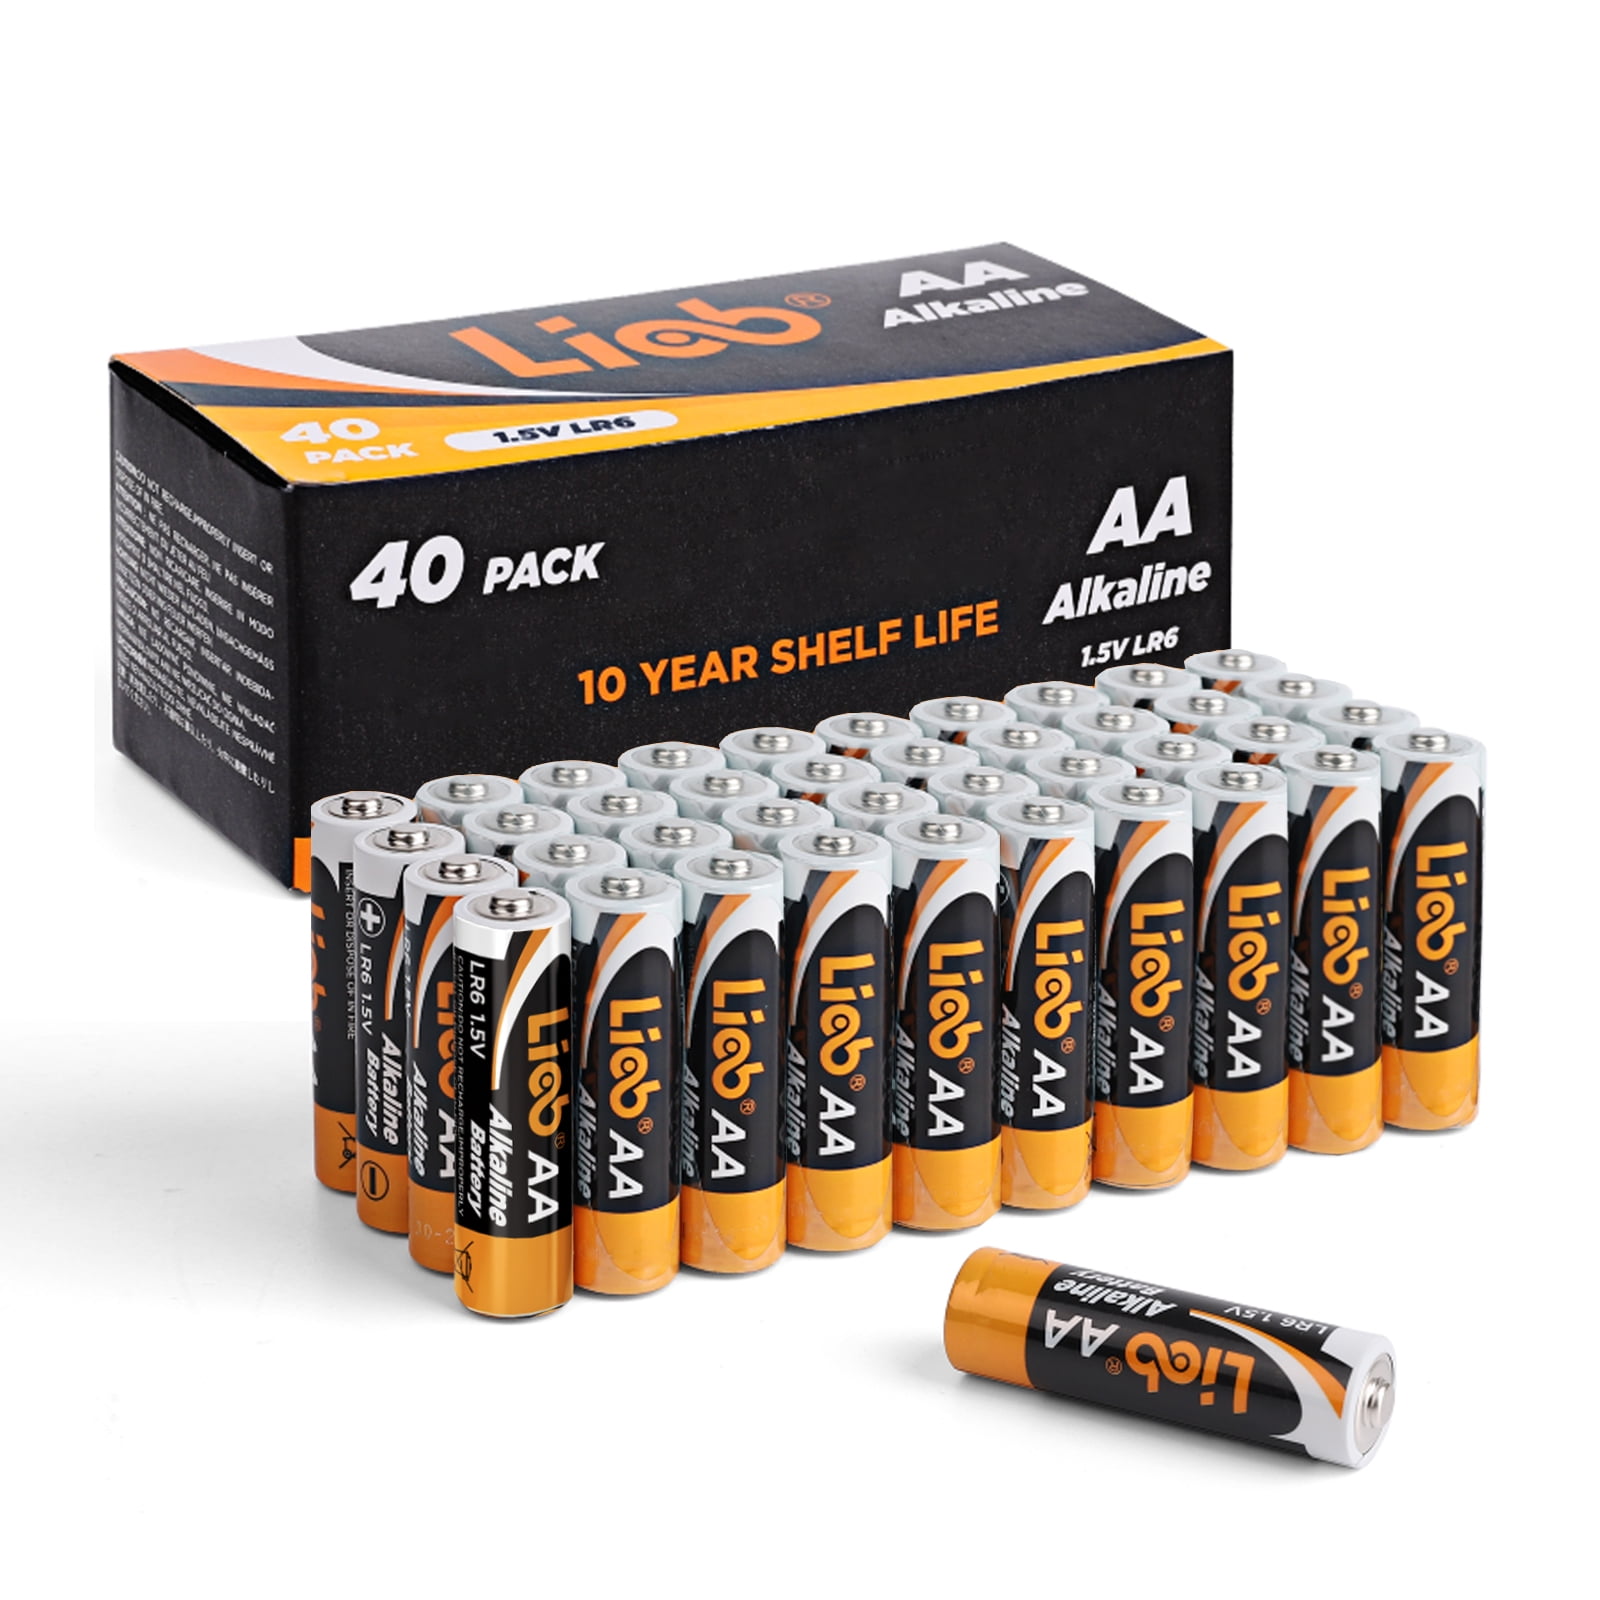 LiCB 1.5 Volts Alkaline AA Batteries 40 Pack, Long-Lasting